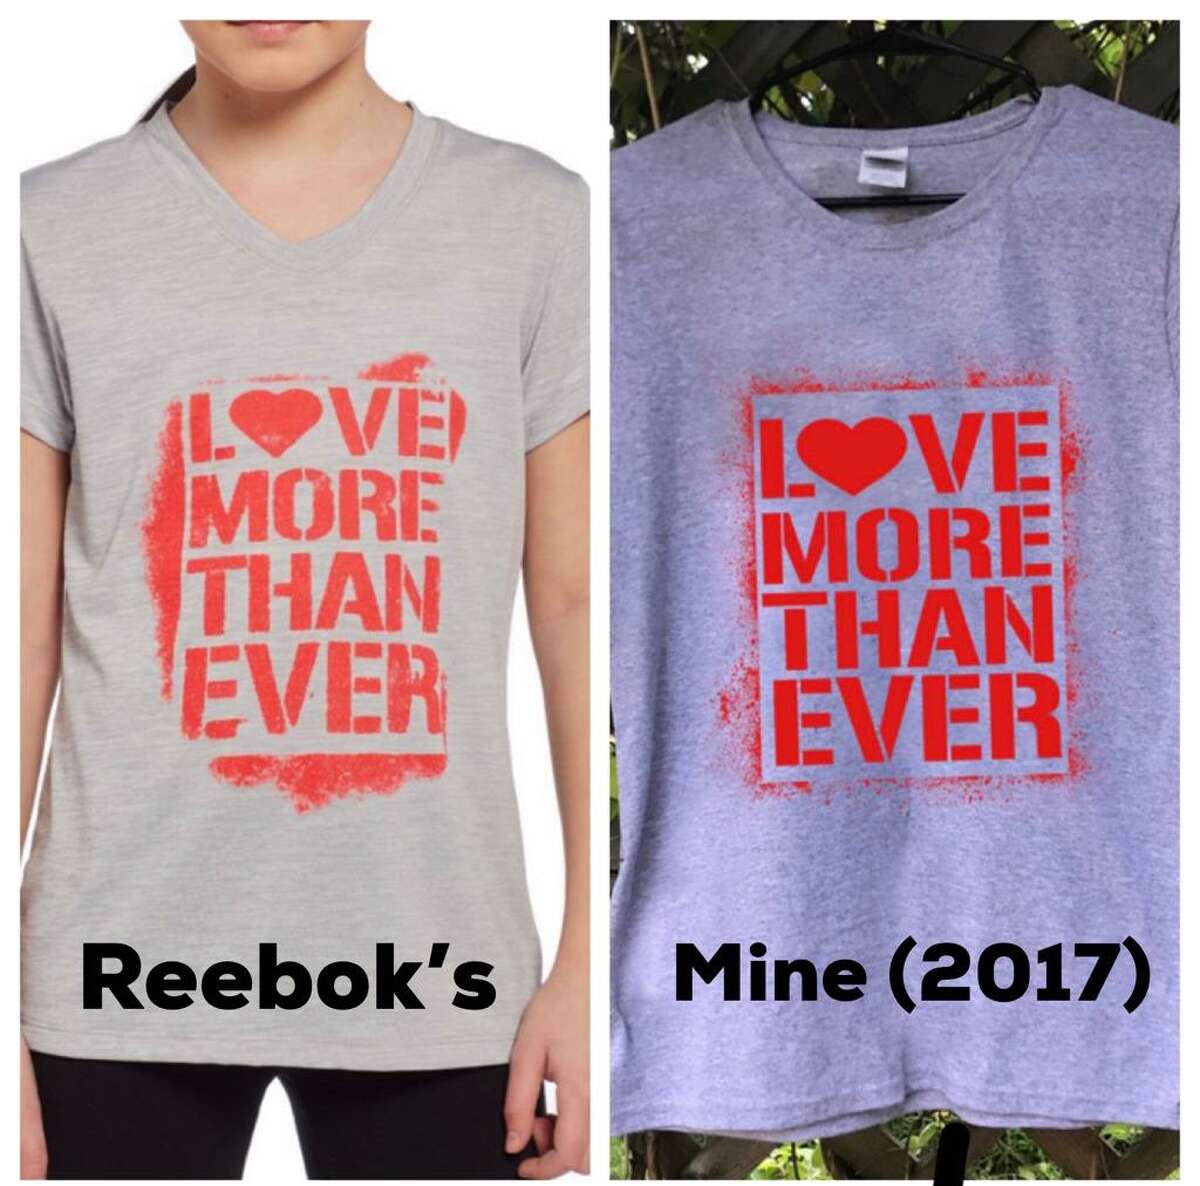 sues Reebok, Dick's Sporting Goods for allegedly stealing design